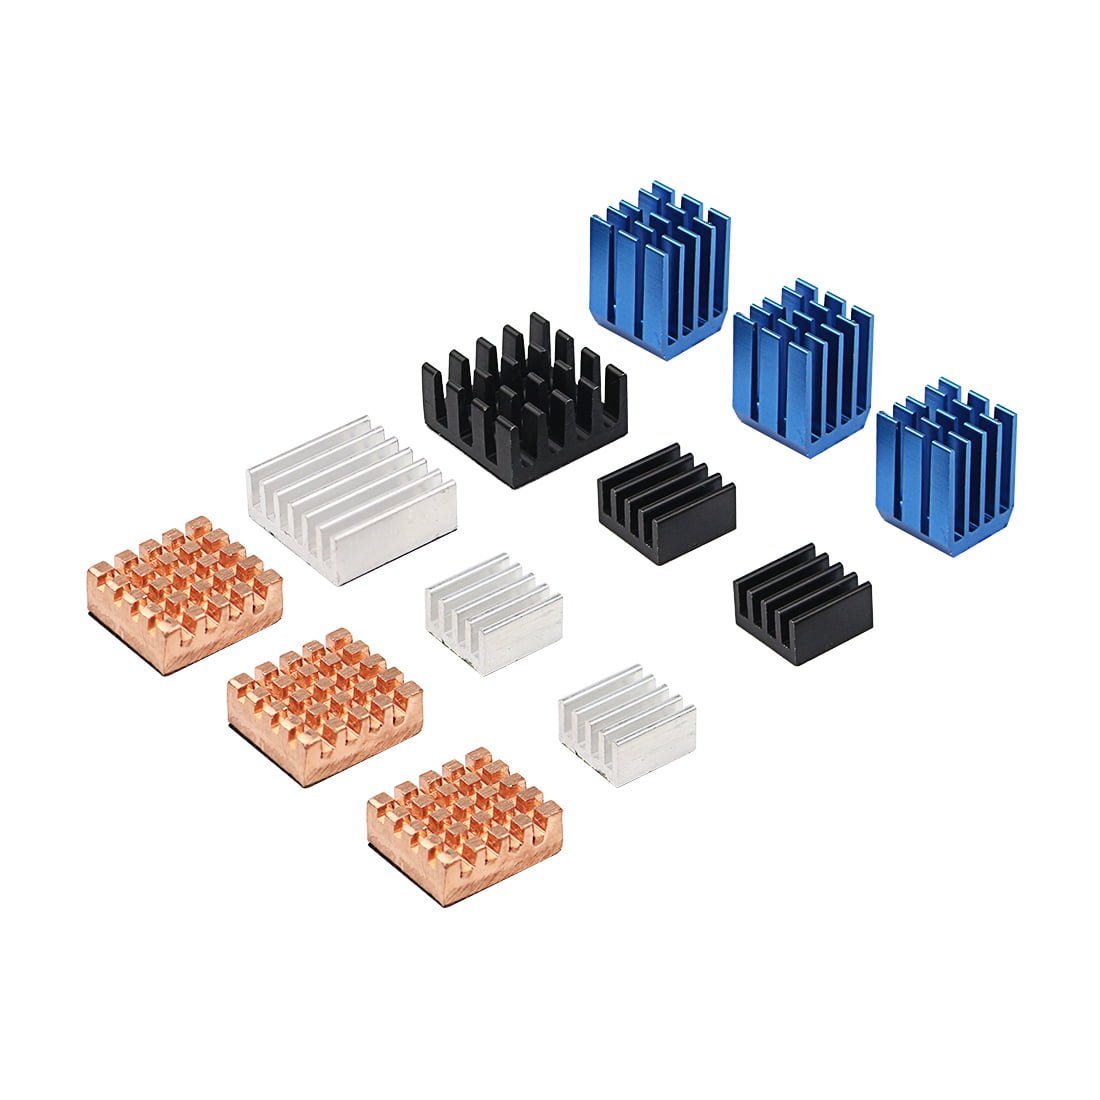 Copper & Aluminium Heatsink with Adhesive Pads for Cooling Raspberry Pi 